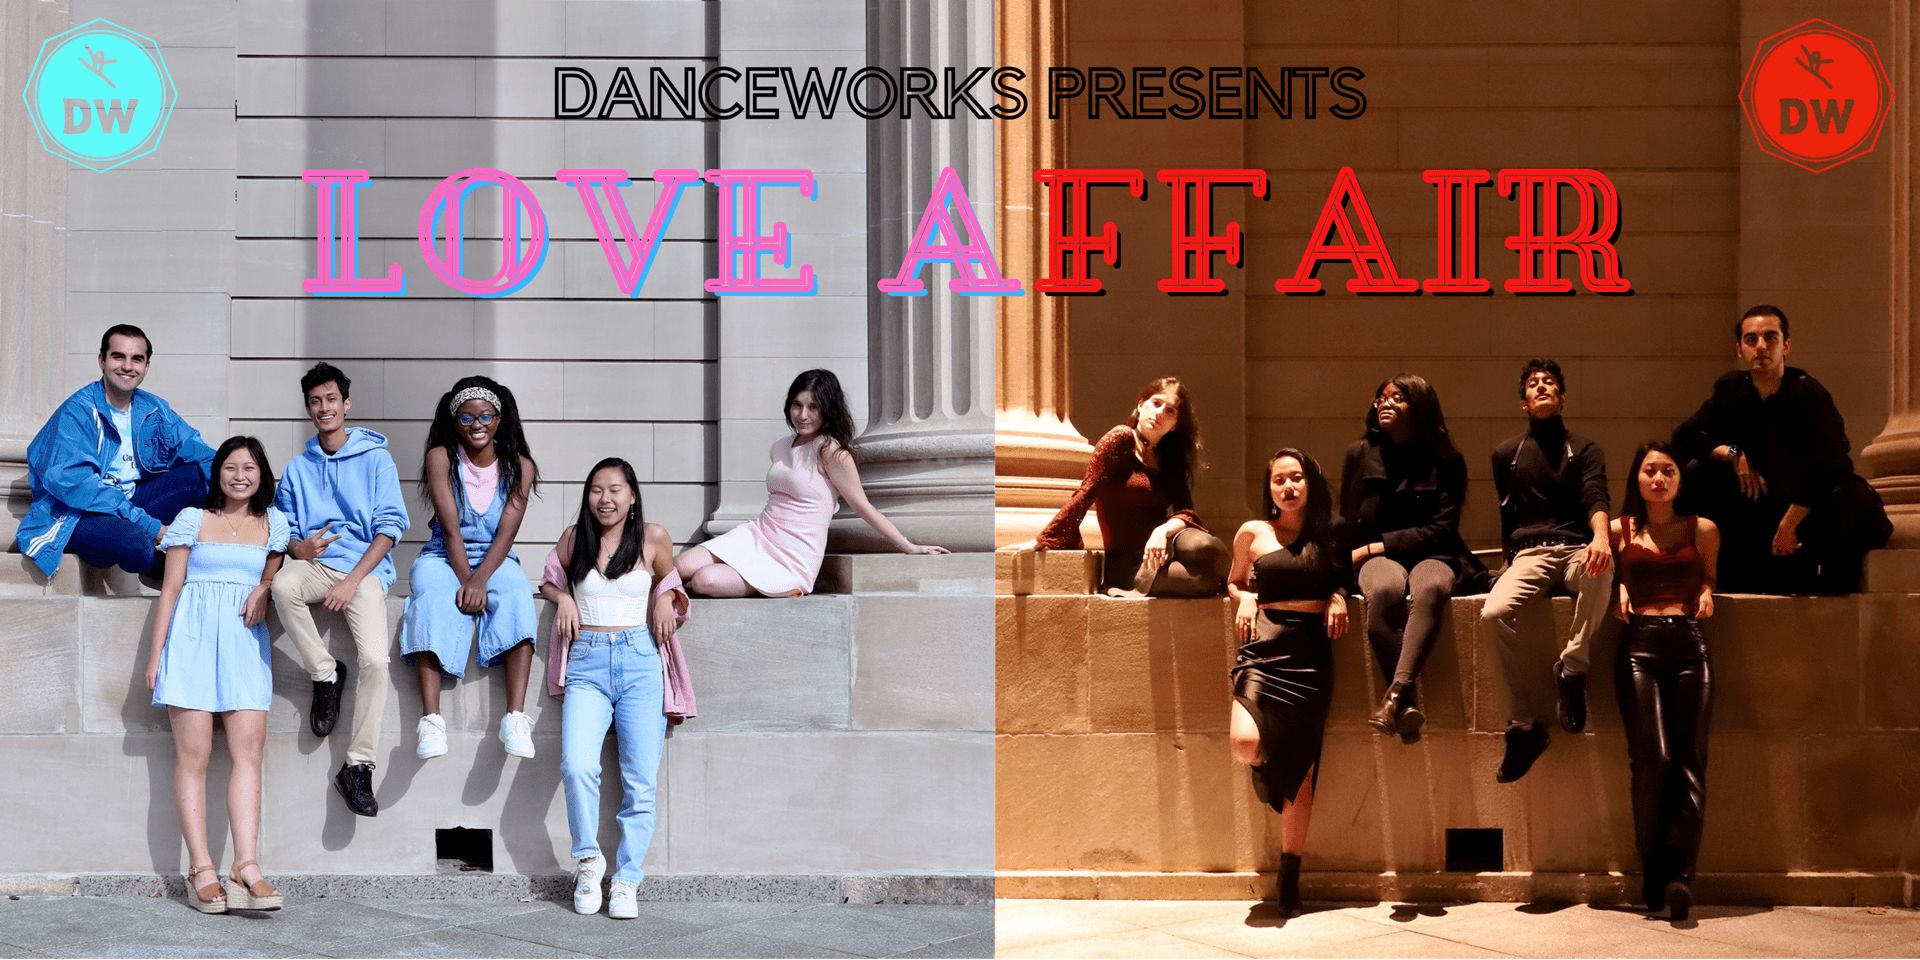 Danceworks board photograph with "love affair" text imposed